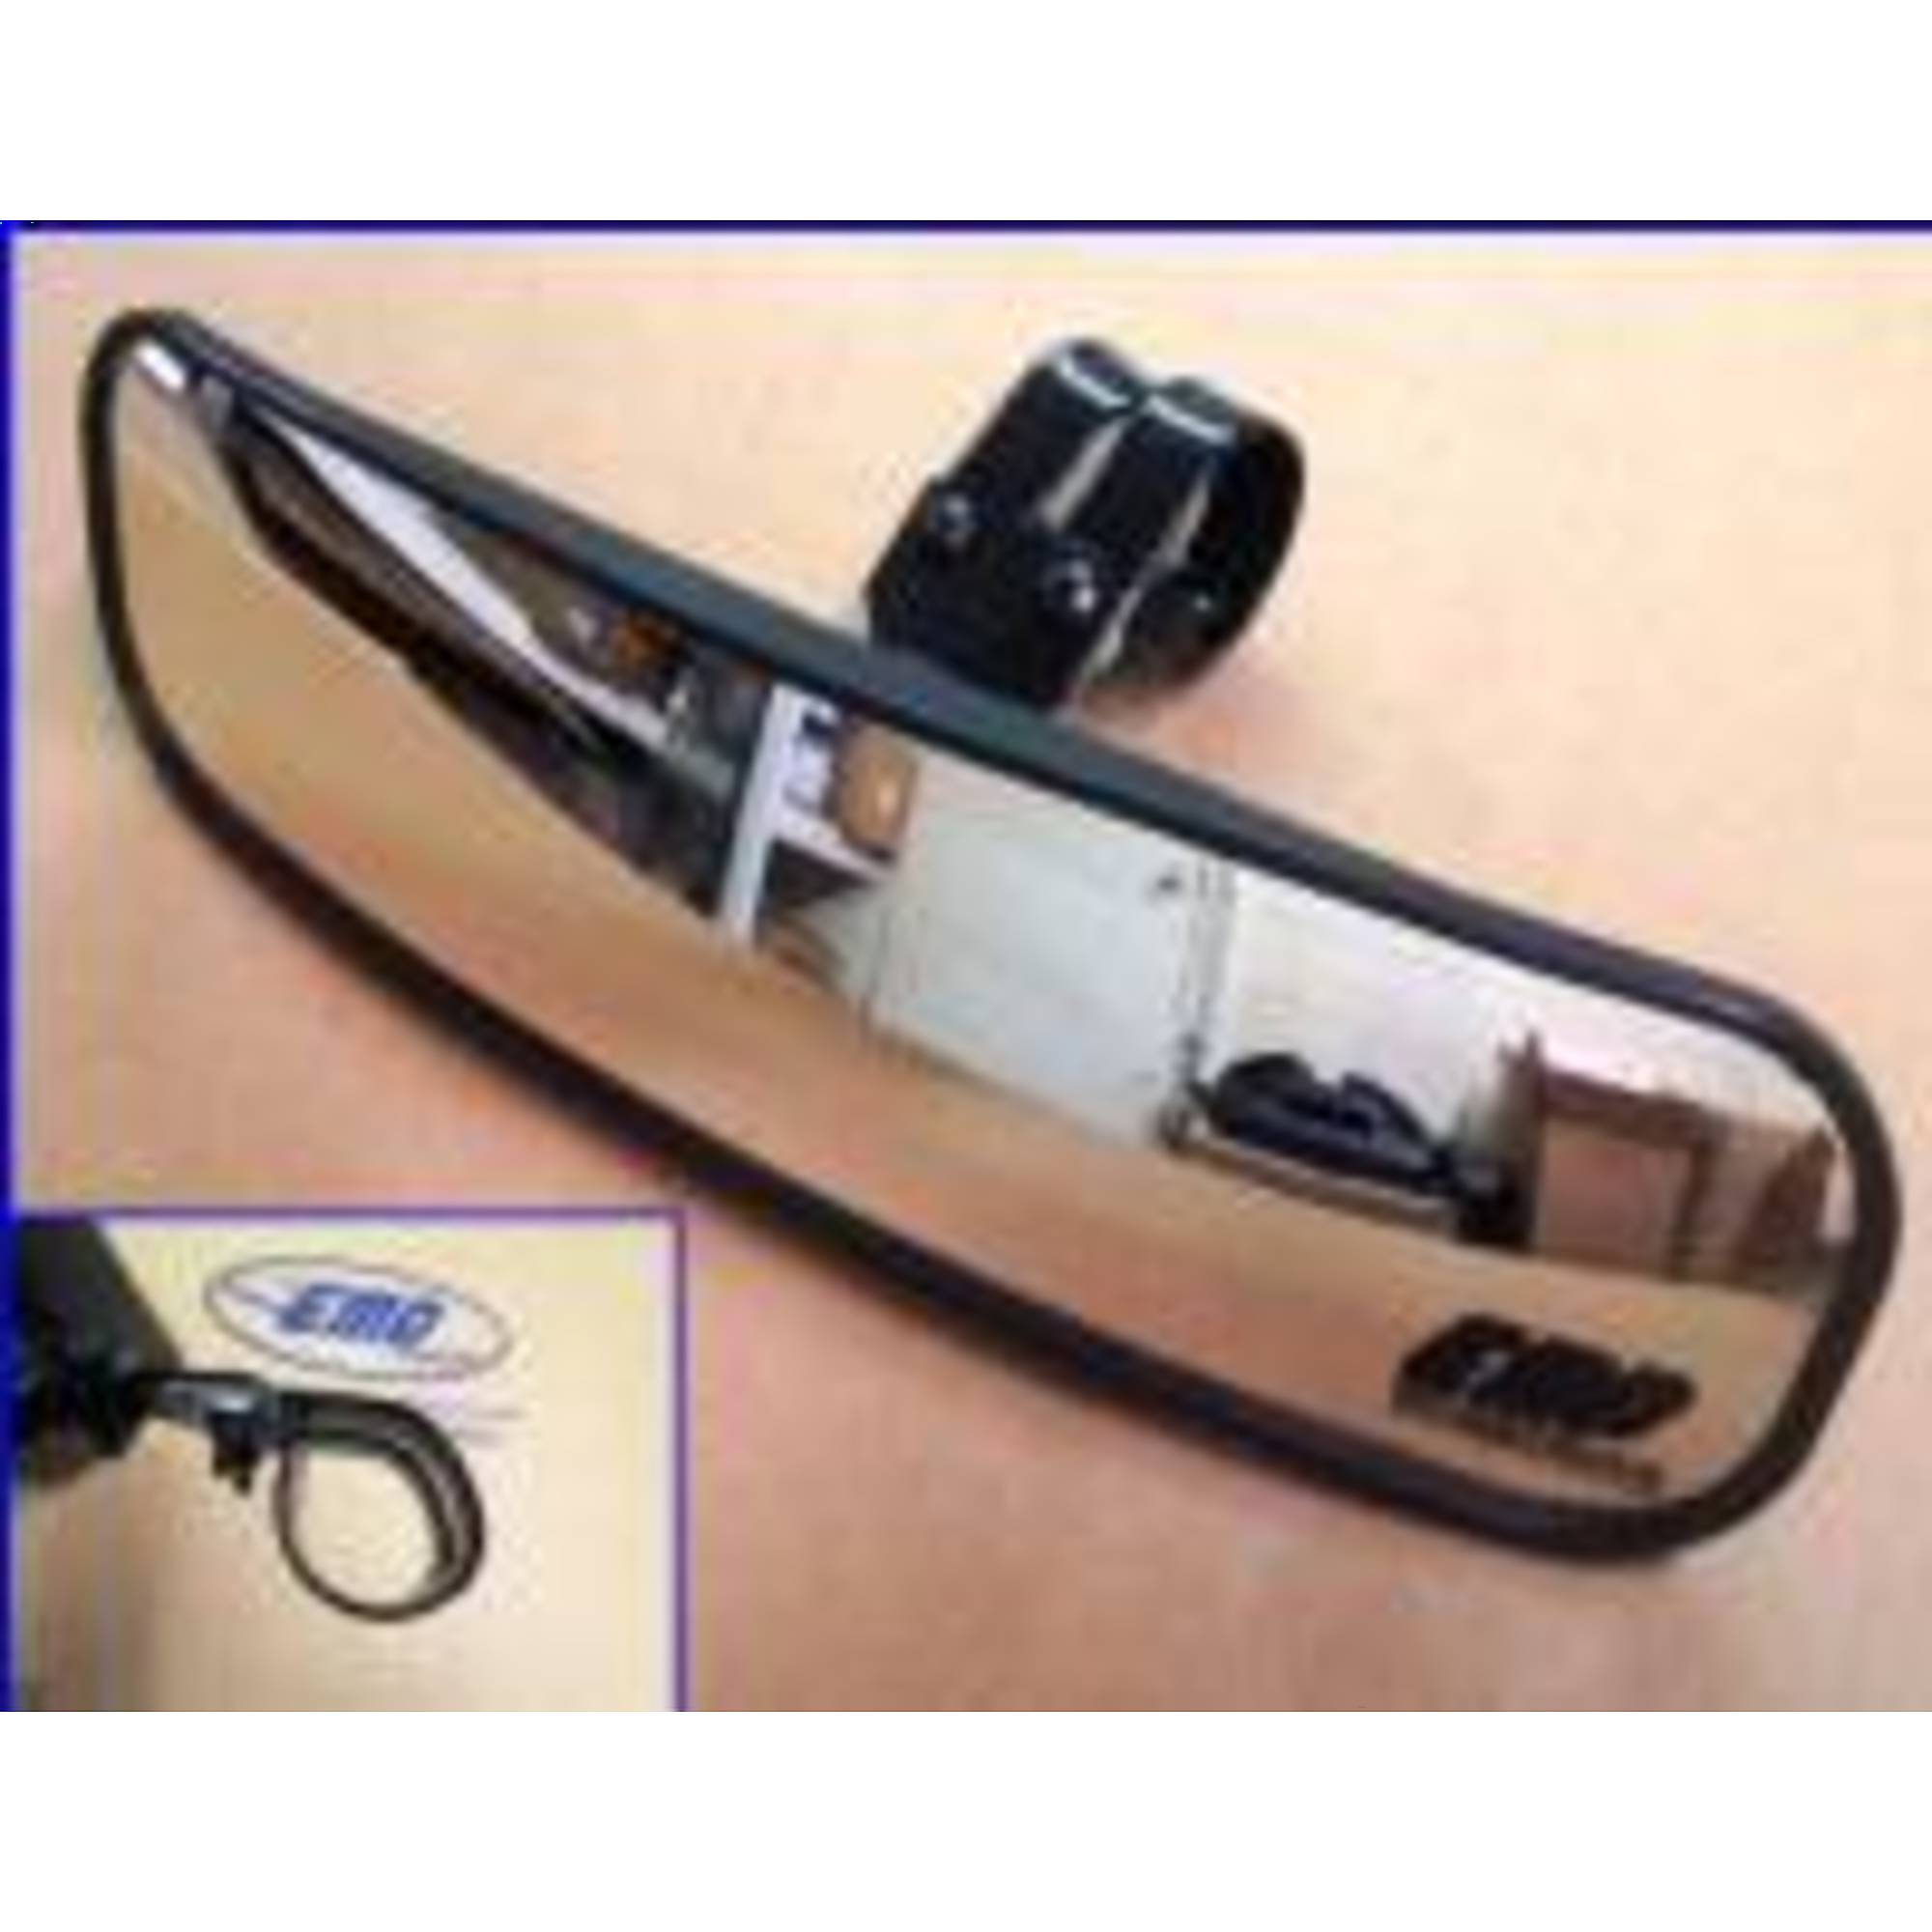 Extreme Metal Products, Panoramic Rear Mirror (2Inch), Model 12533-2 inch